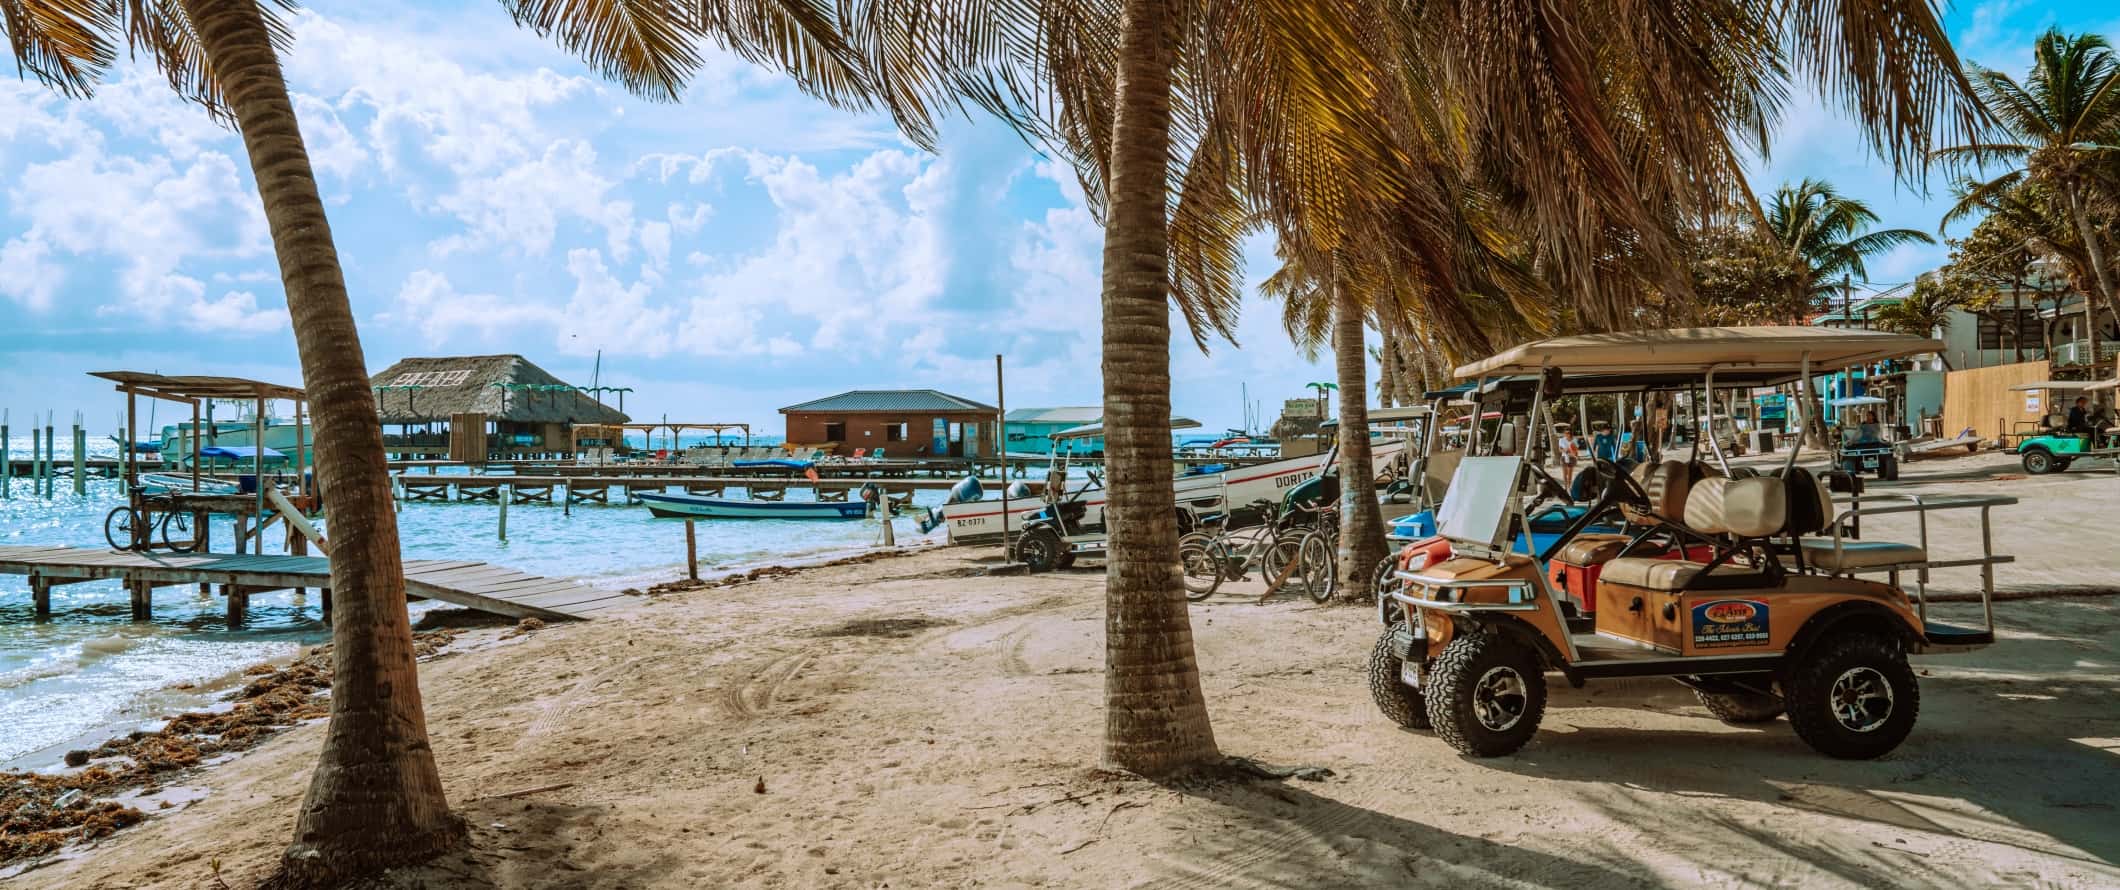 Golf carts under palm trees on the beach in Belize